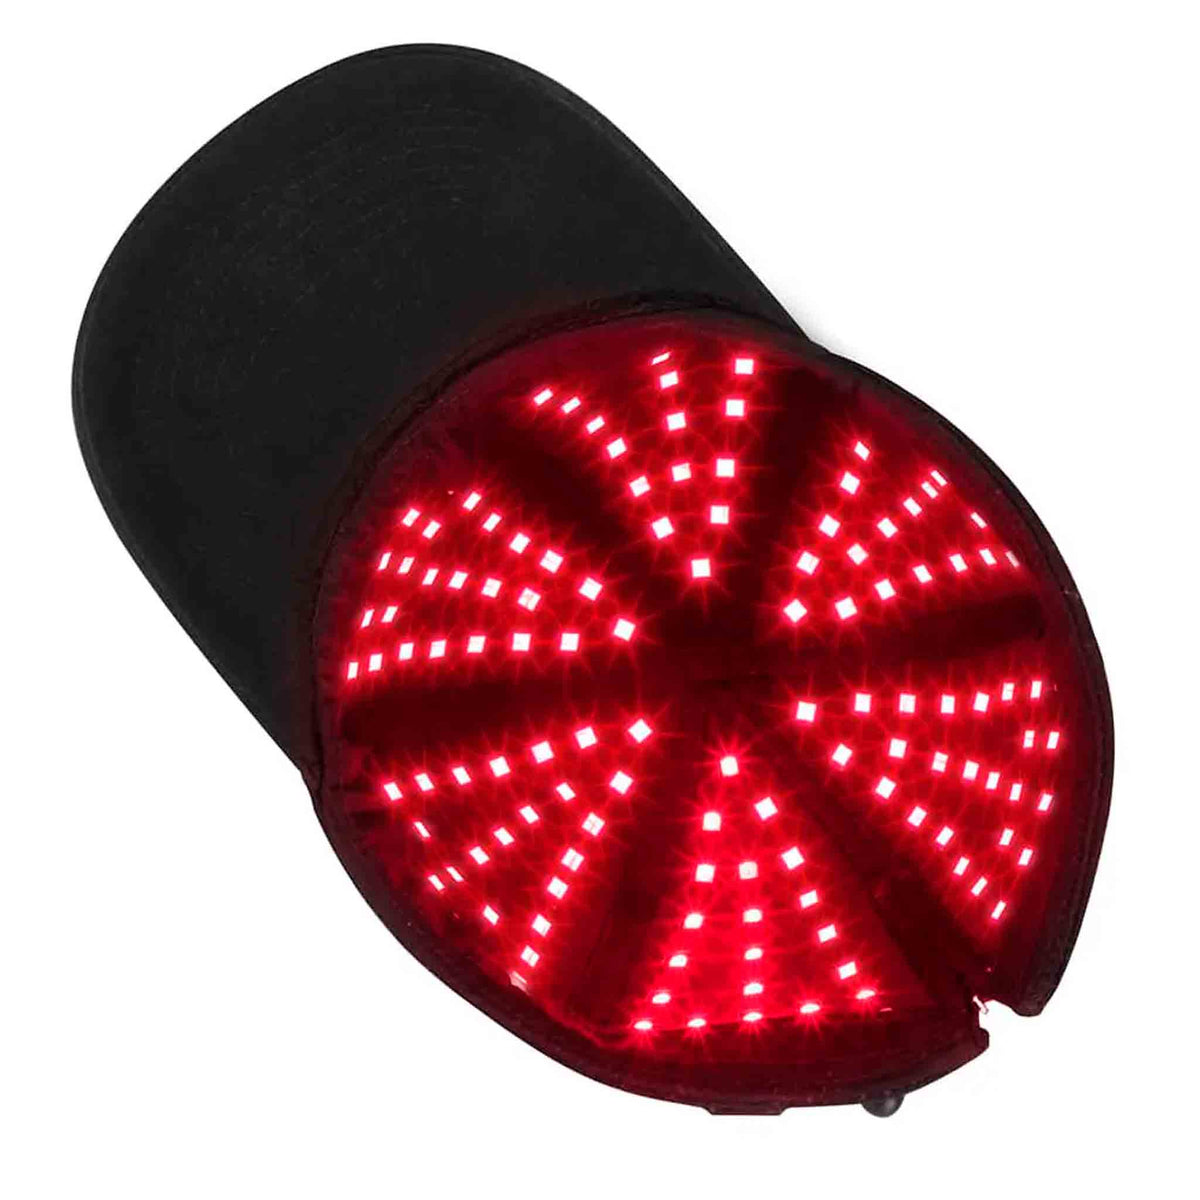 TLA - Red Light Therapy Cap